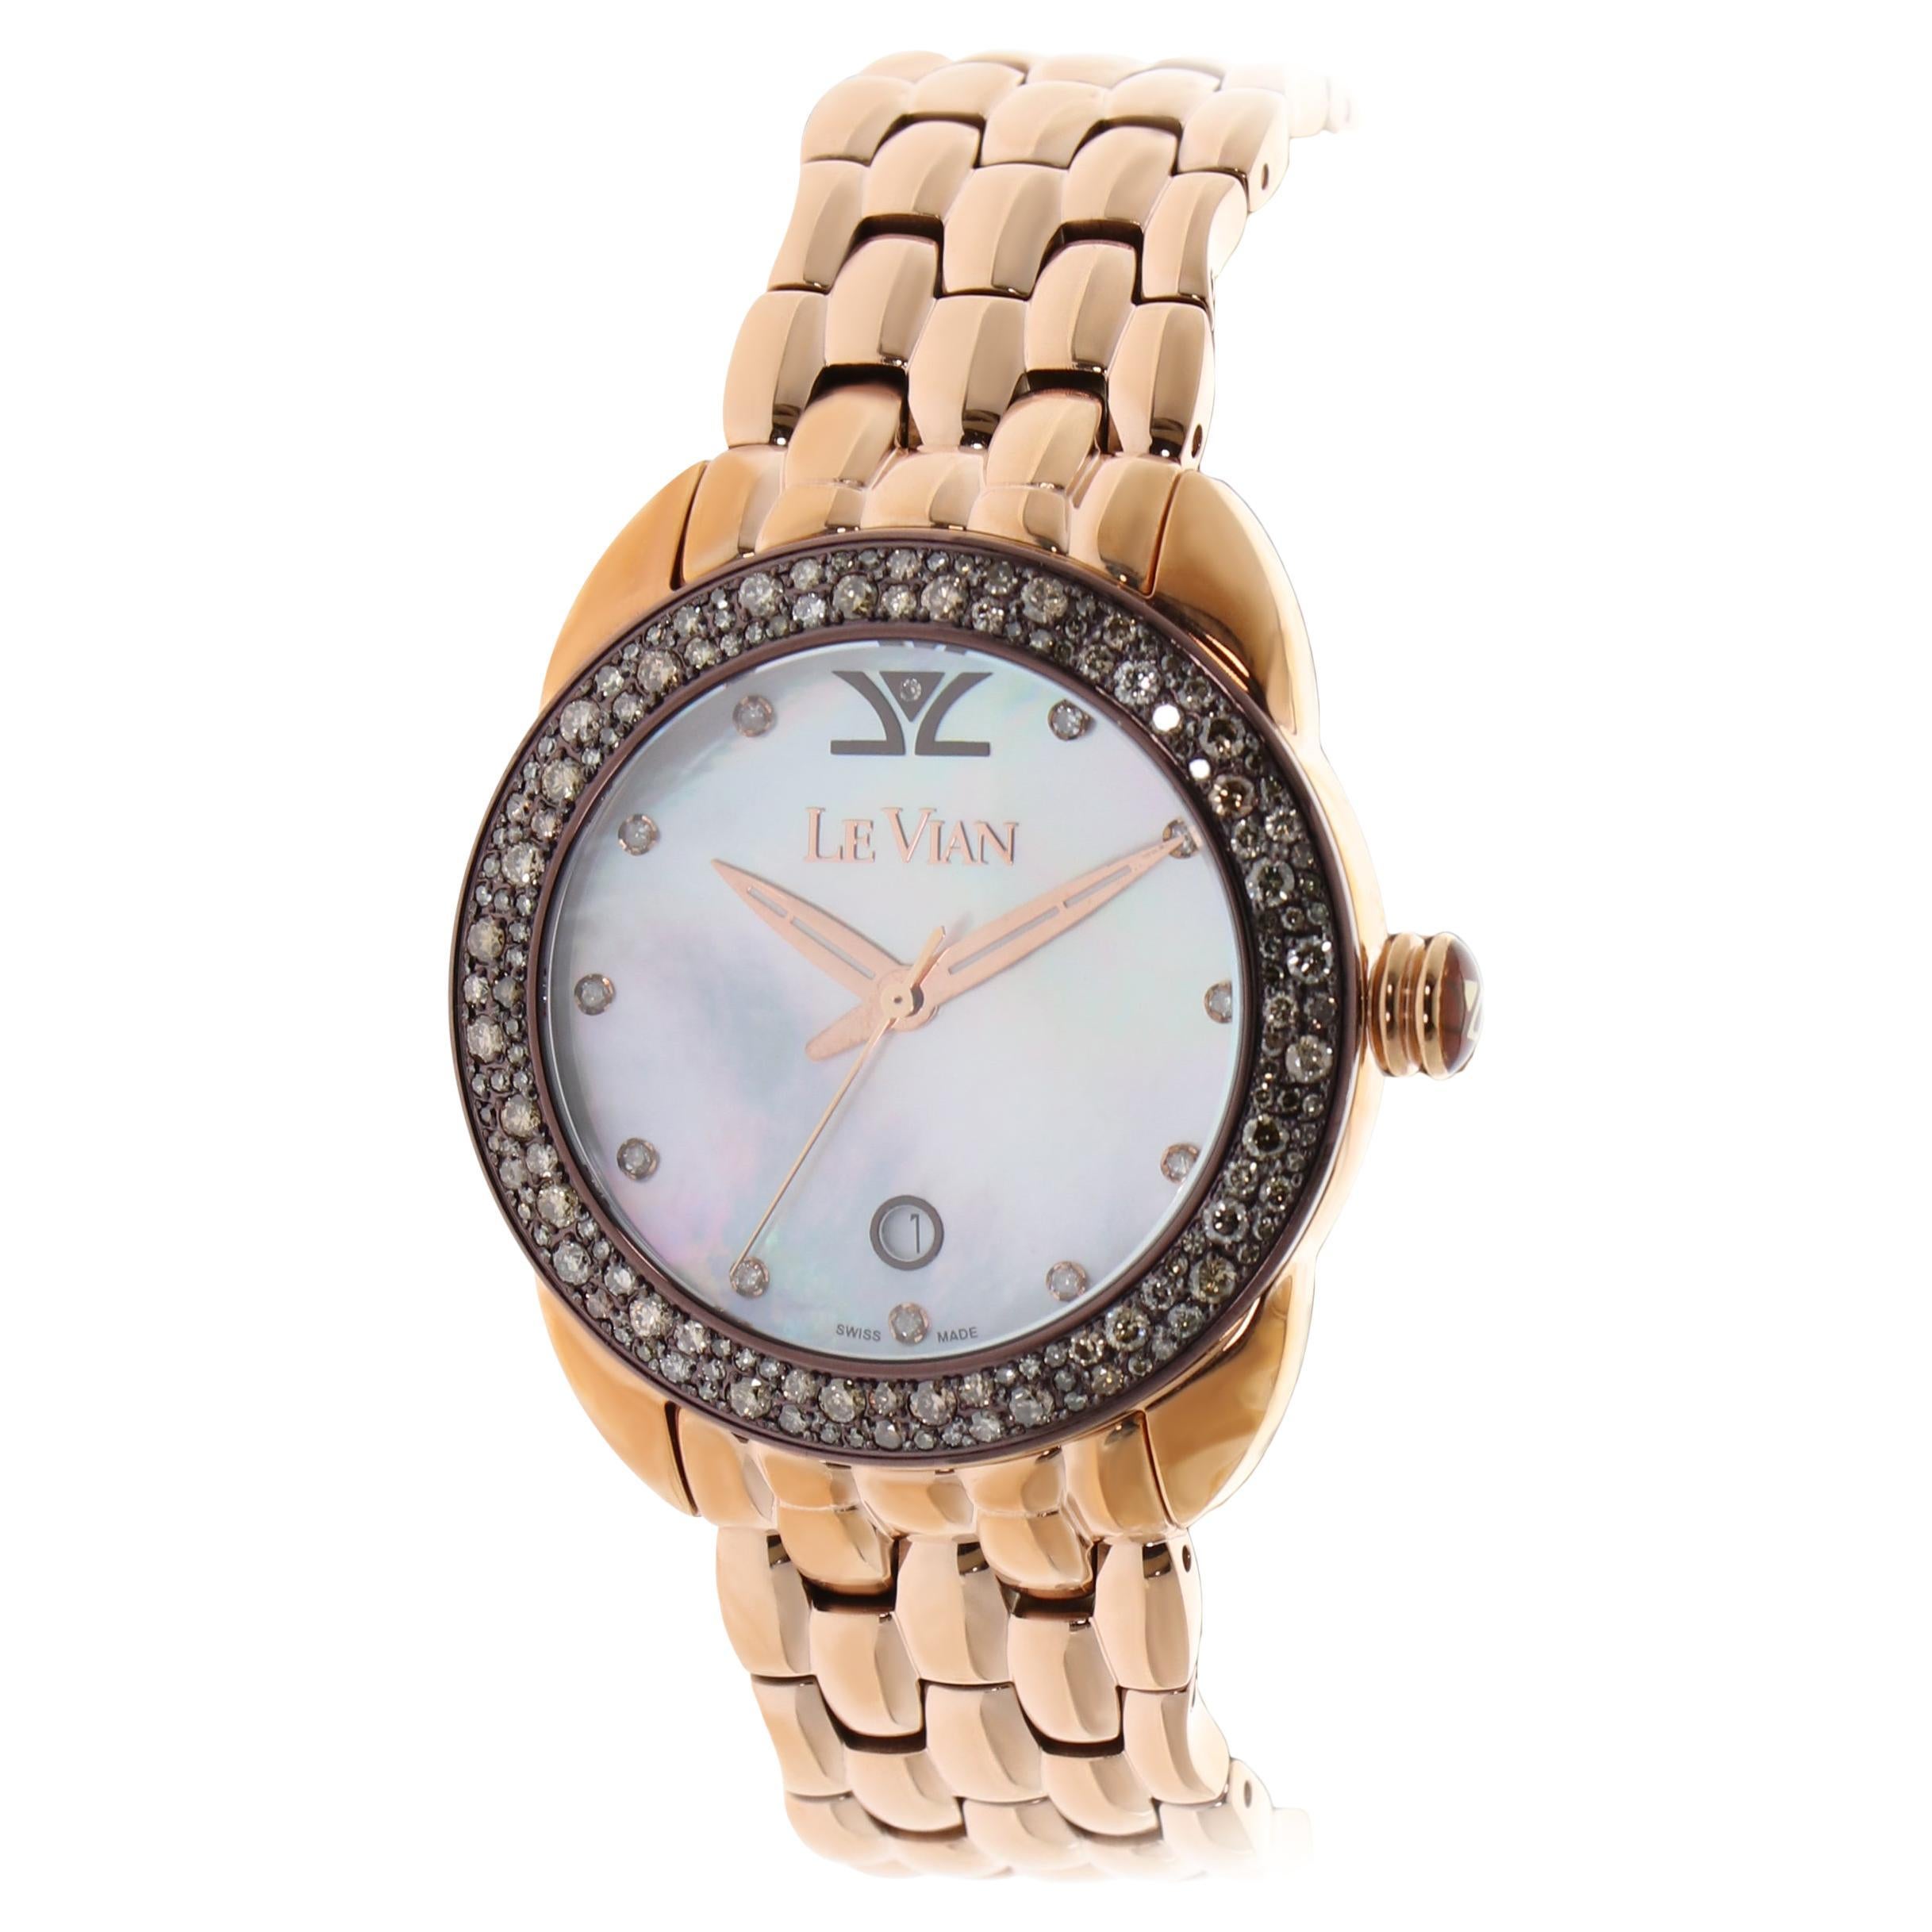 Le Vian Wristwatch Chocolate Vanilla Diamonds Strawberry Gold Stainless Steel For Sale